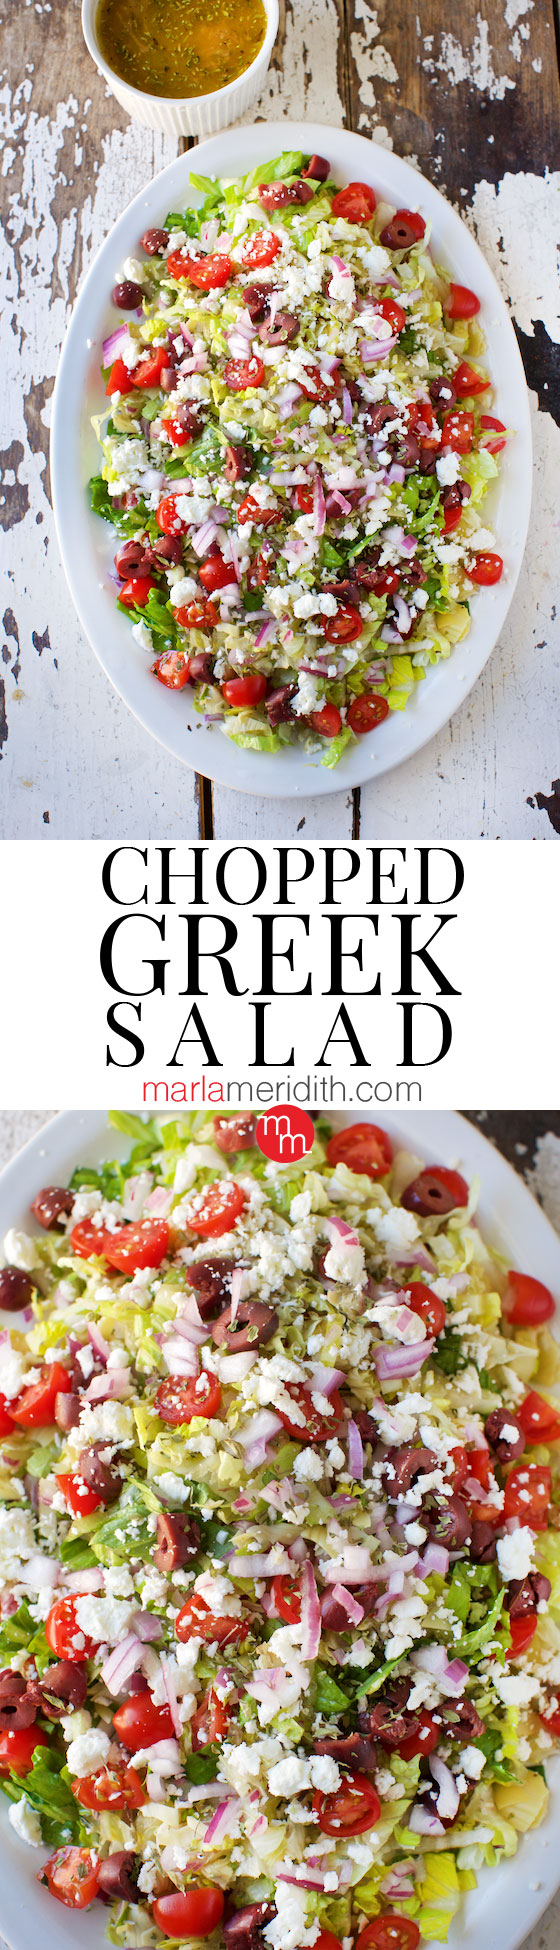 Chopped Greek Salad recipe. The BEST salad you will ever eat. MarlaMeridith.com ( @marlameridith )